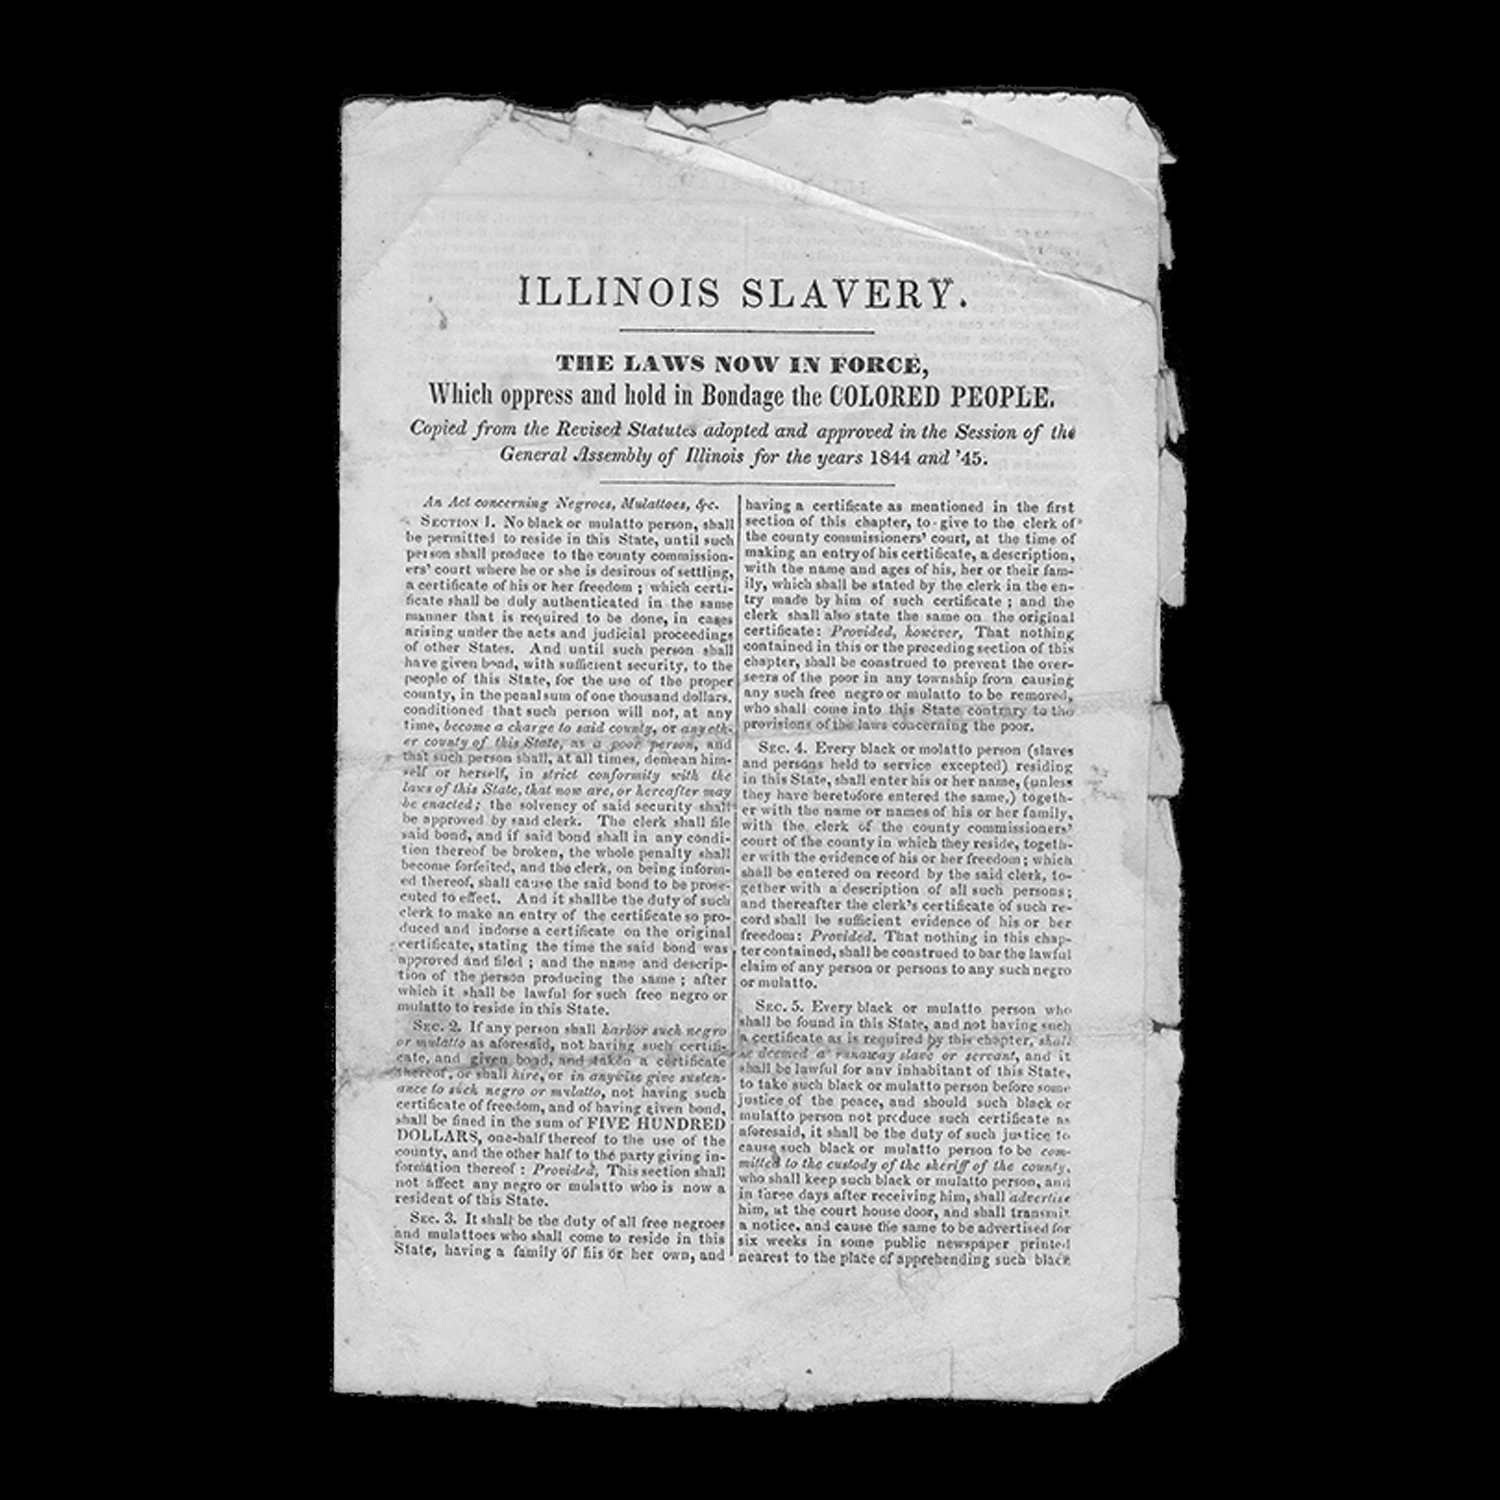 Photograph of legal document with torn edges. It reads “Illinois Slavery. The laws now in force, which oppress and hold in Bondage the Colored People. Copied from the Revised Statues adopted and approved in the Session of the General Assembly of Illinois for the years 1844 and ’45.’